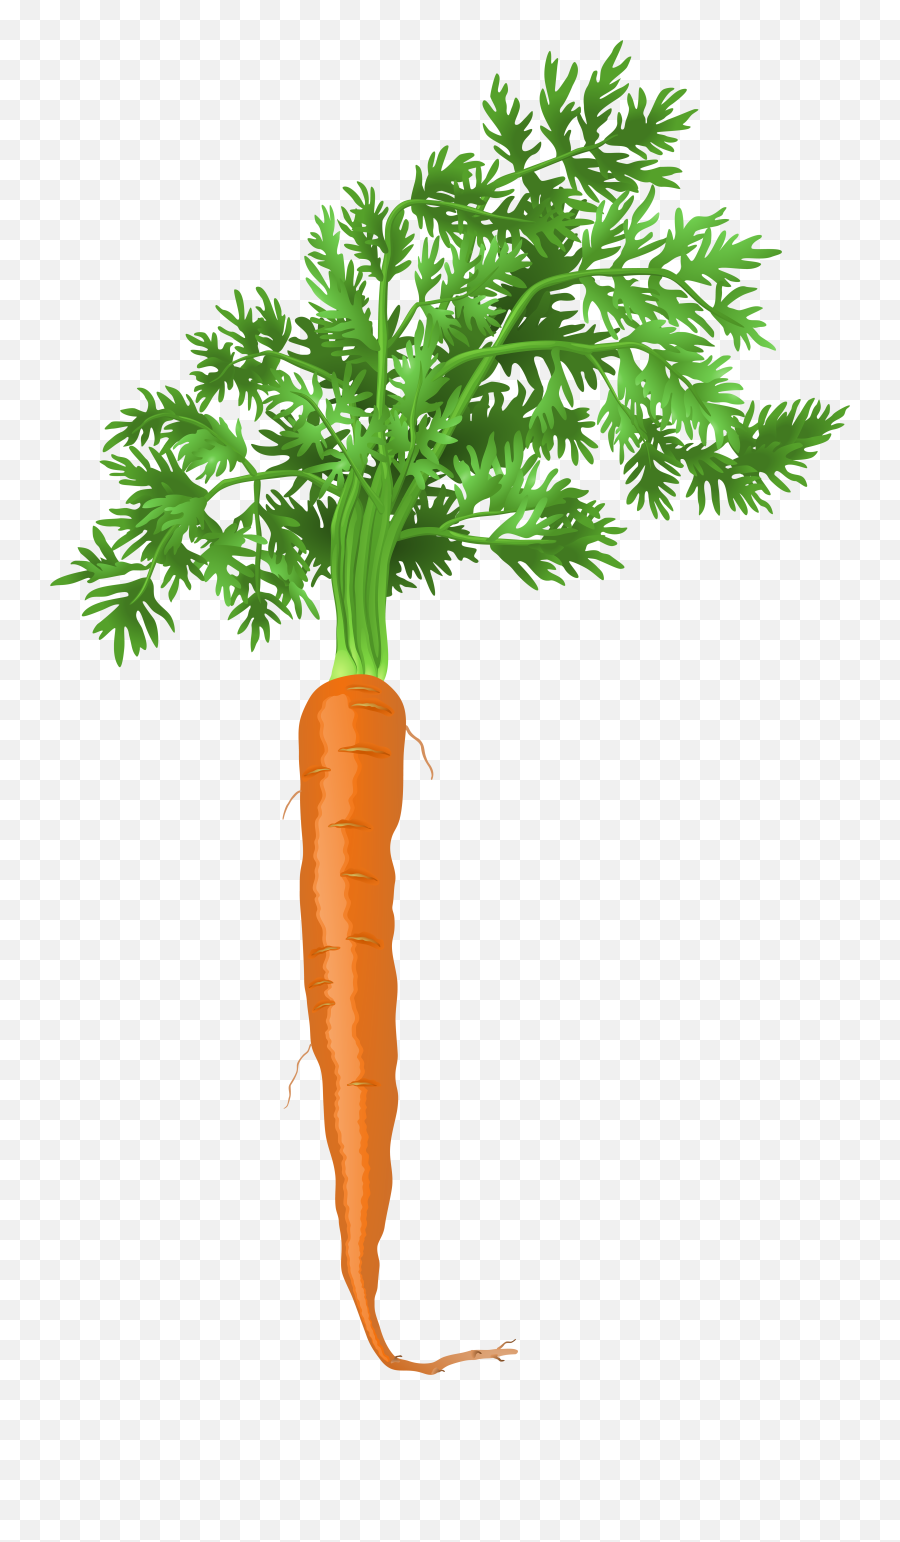 Carrot Plant Transparent U0026 Png Clipart Free Download - Ywd,Carrot Transparent Background